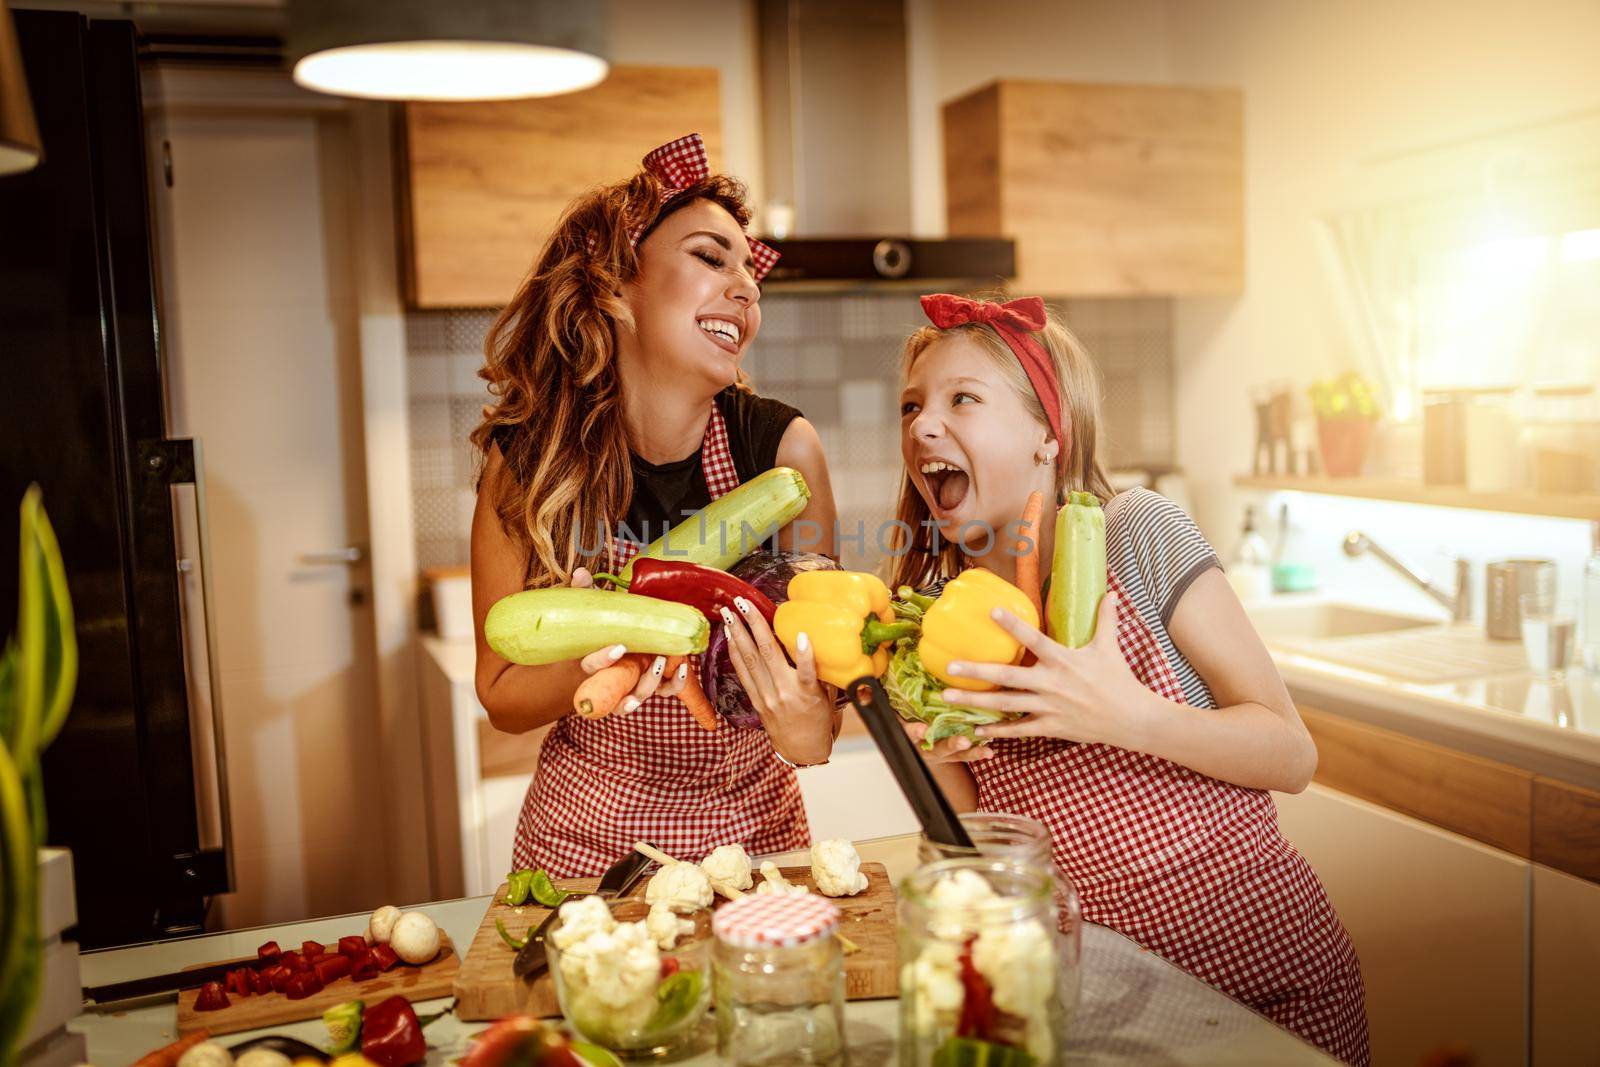 Happy mother and her daughter enjoy preparing for marinating vegetables and making healthy meal together at their home kitchen.  